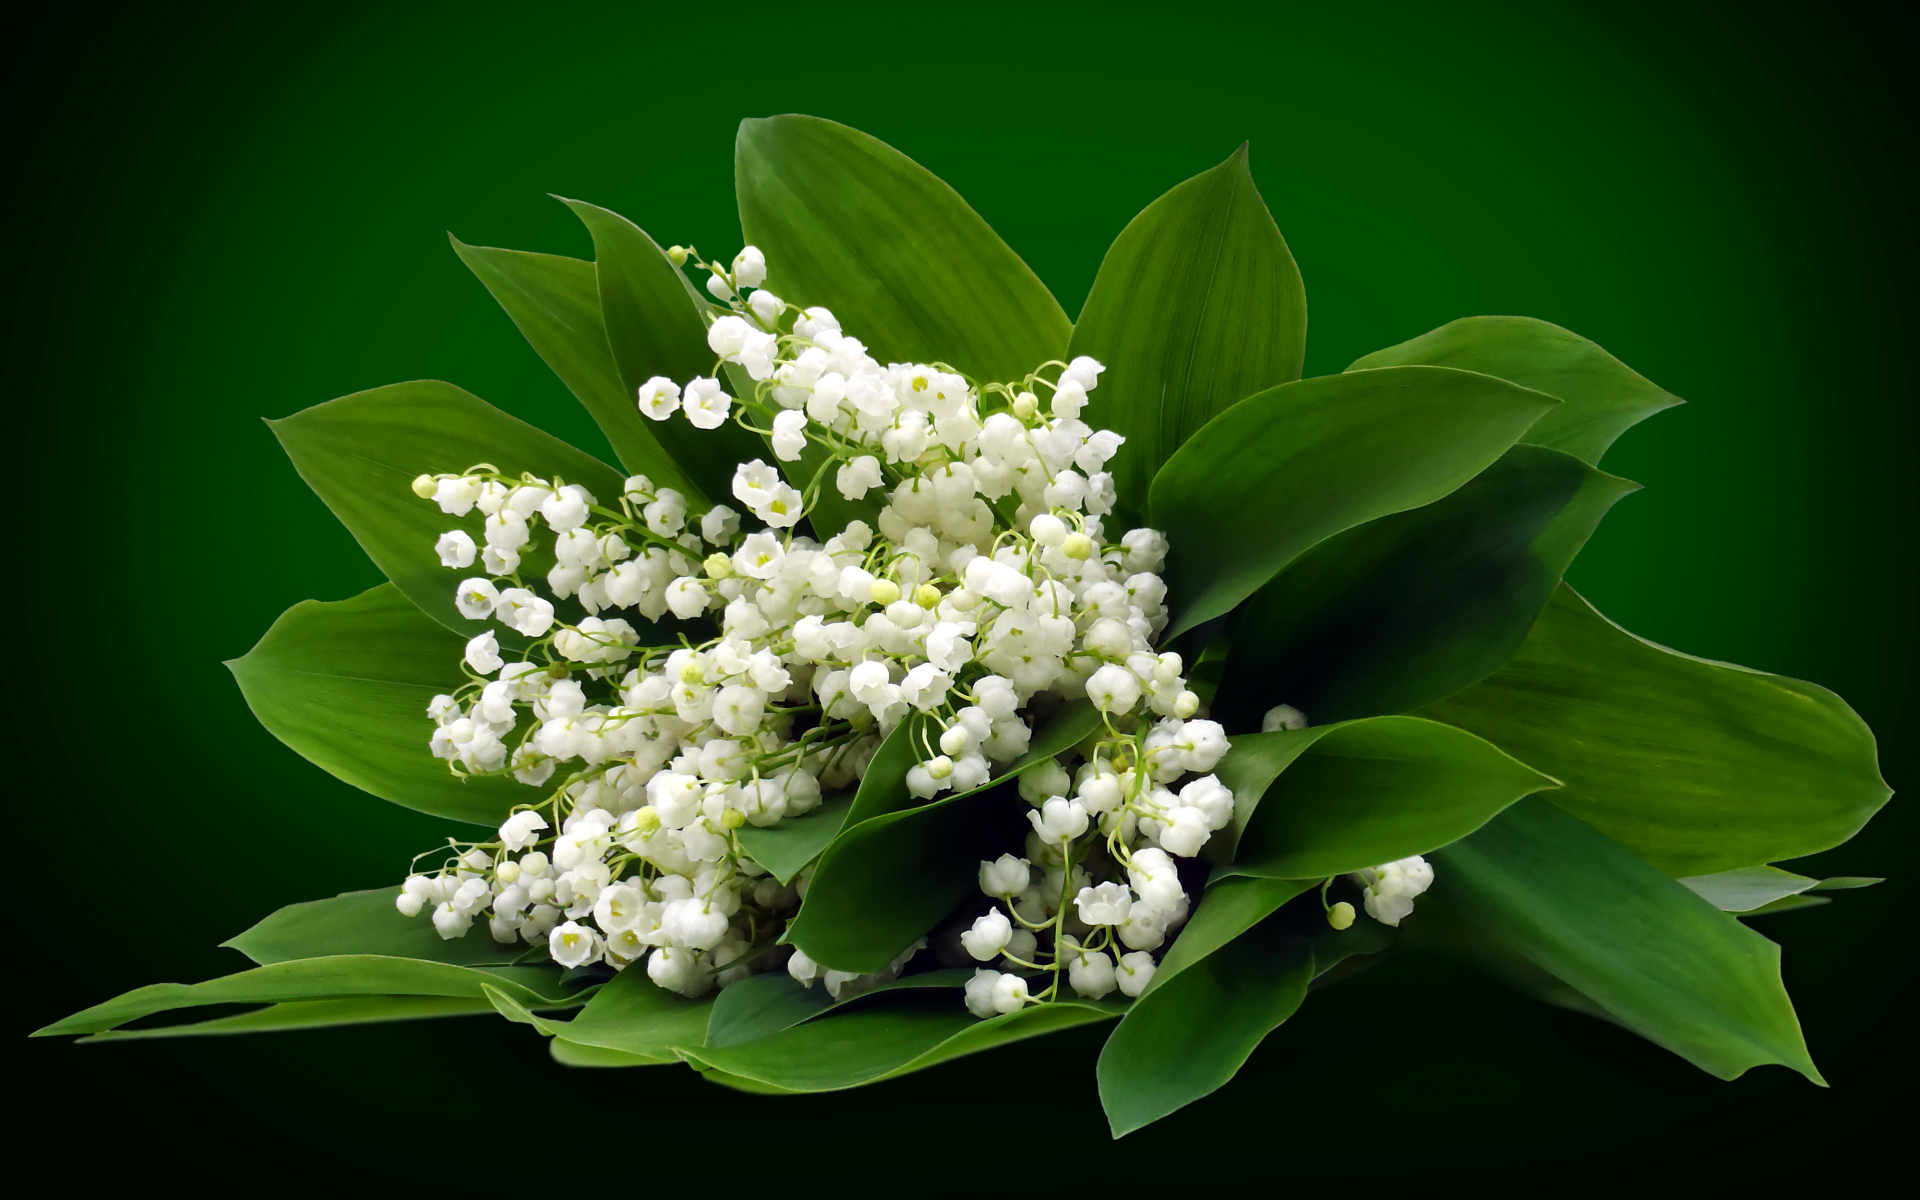 White Lily Of The Valley wallpaper. White Lily Of The Valley stock